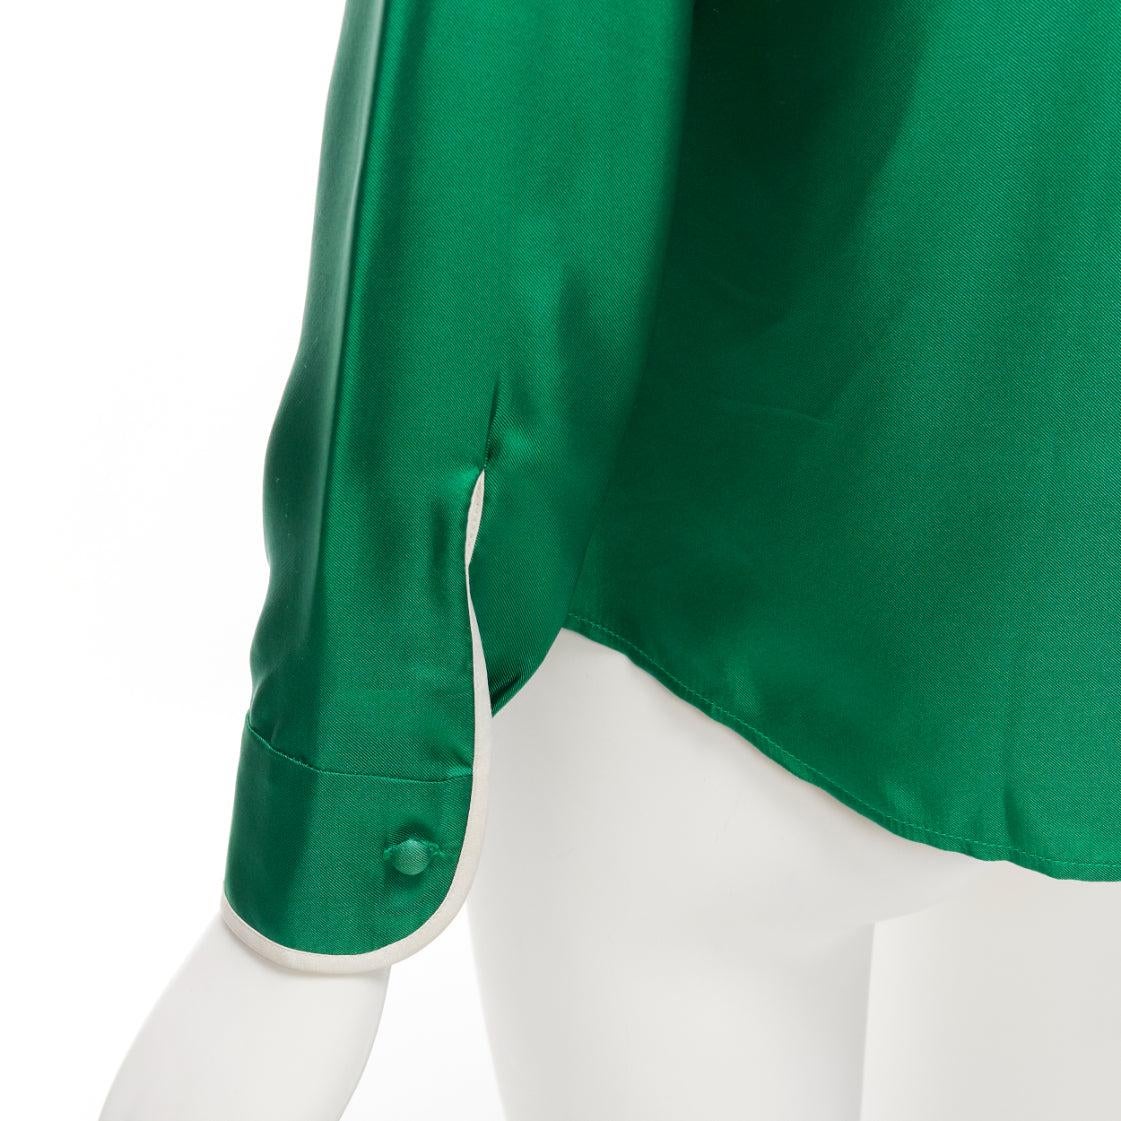 RED VALENTINO 2022 100% silk green bow tie Peter Pan blouse shirt IT38 XS
Reference: AAWC/A00740
Brand: Red Valentino
Collection: 2022
Material: Silk
Color: Green, White
Pattern: Solid
Closure: Button
Extra Details: Hoop design at back for neck